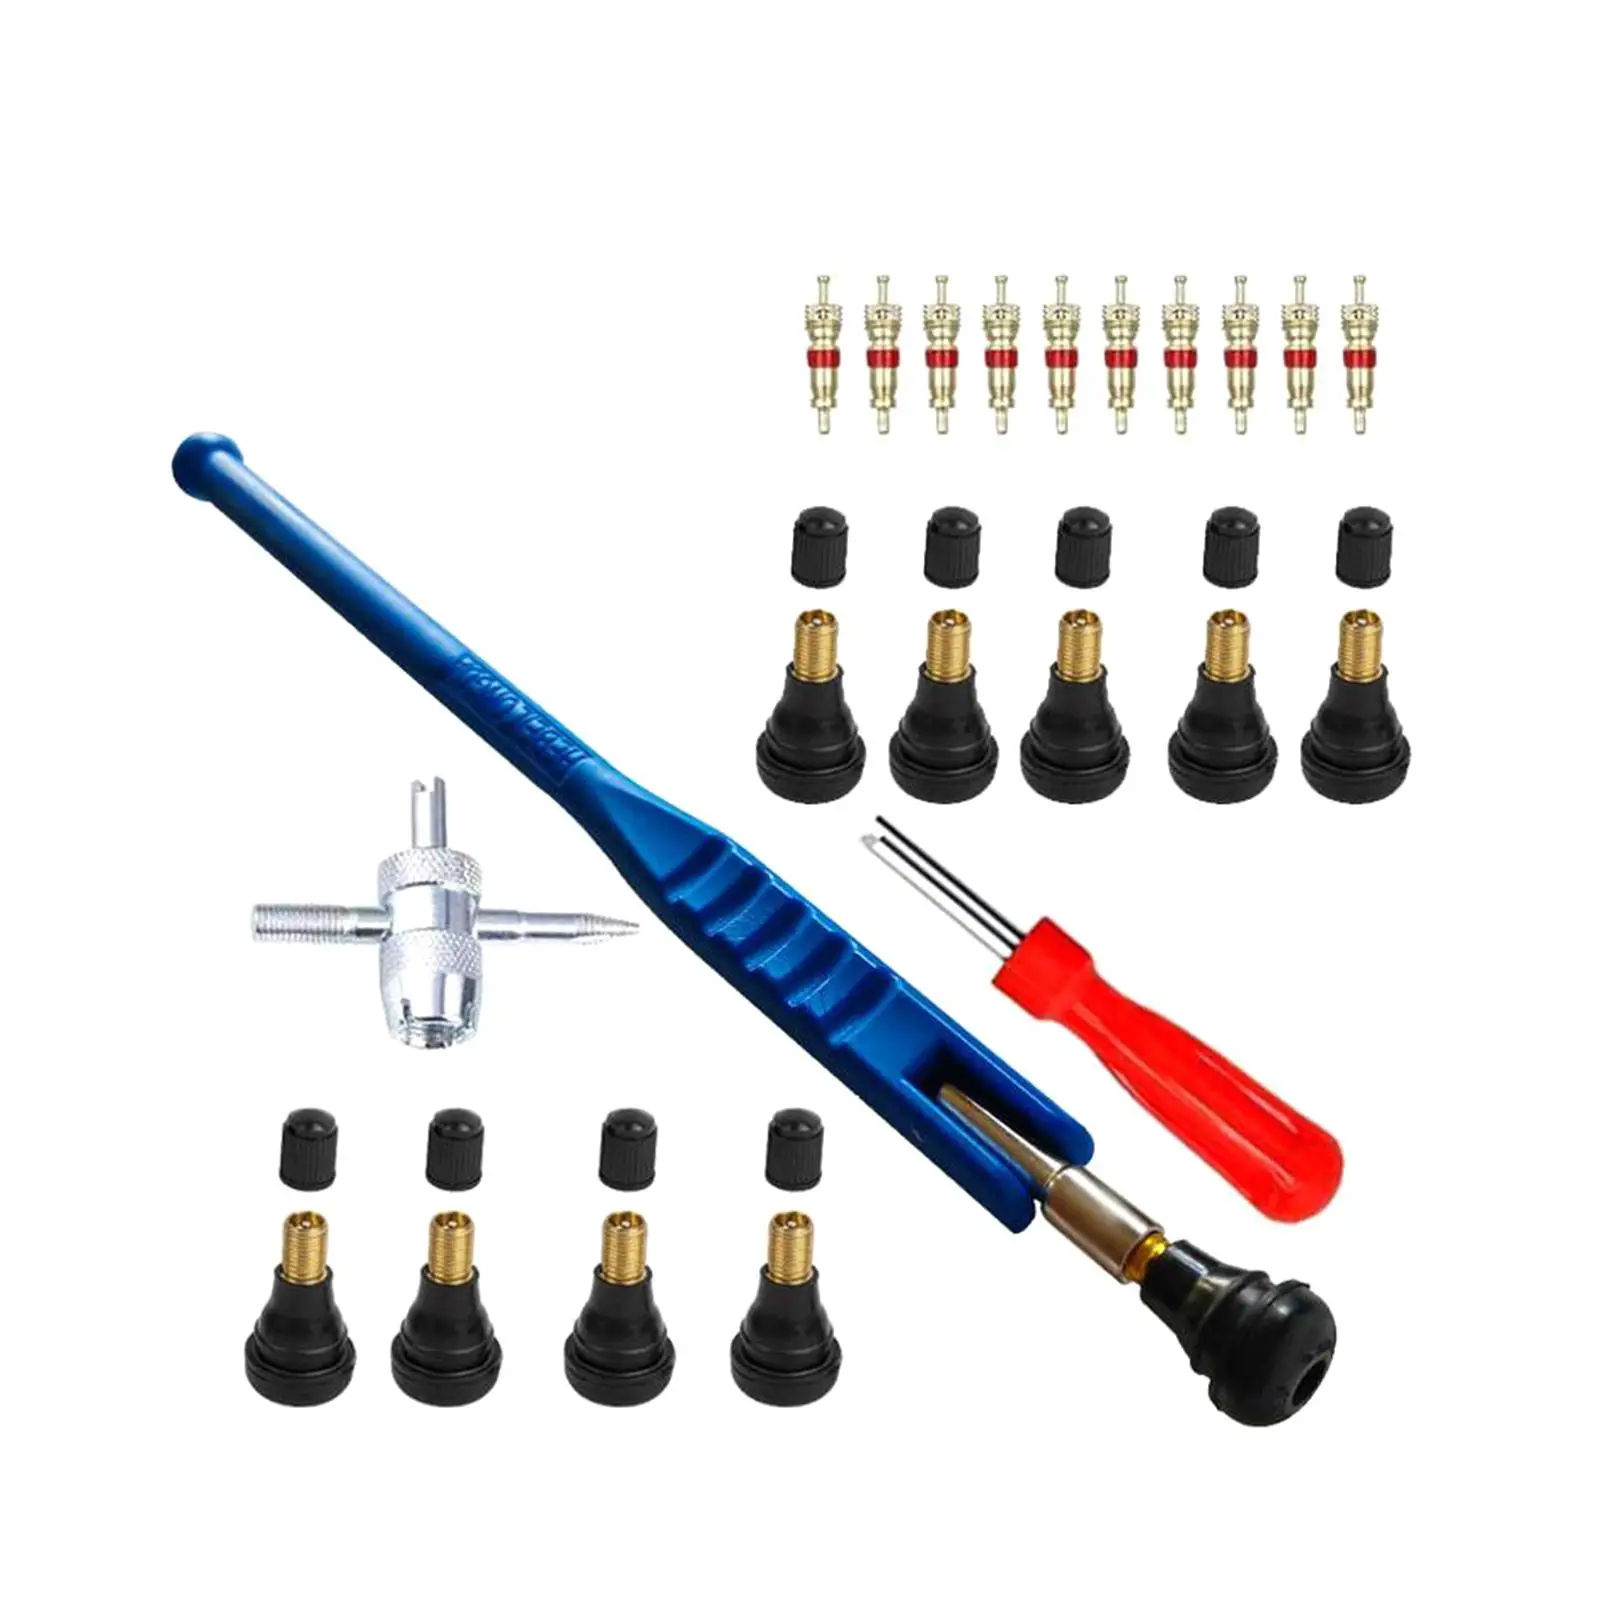 23Pcs TR412 Car Accessories Multifunctional Tire Repair Install Tool Tyre Valve Removal Tool for Car Truck Motorcycle Bike